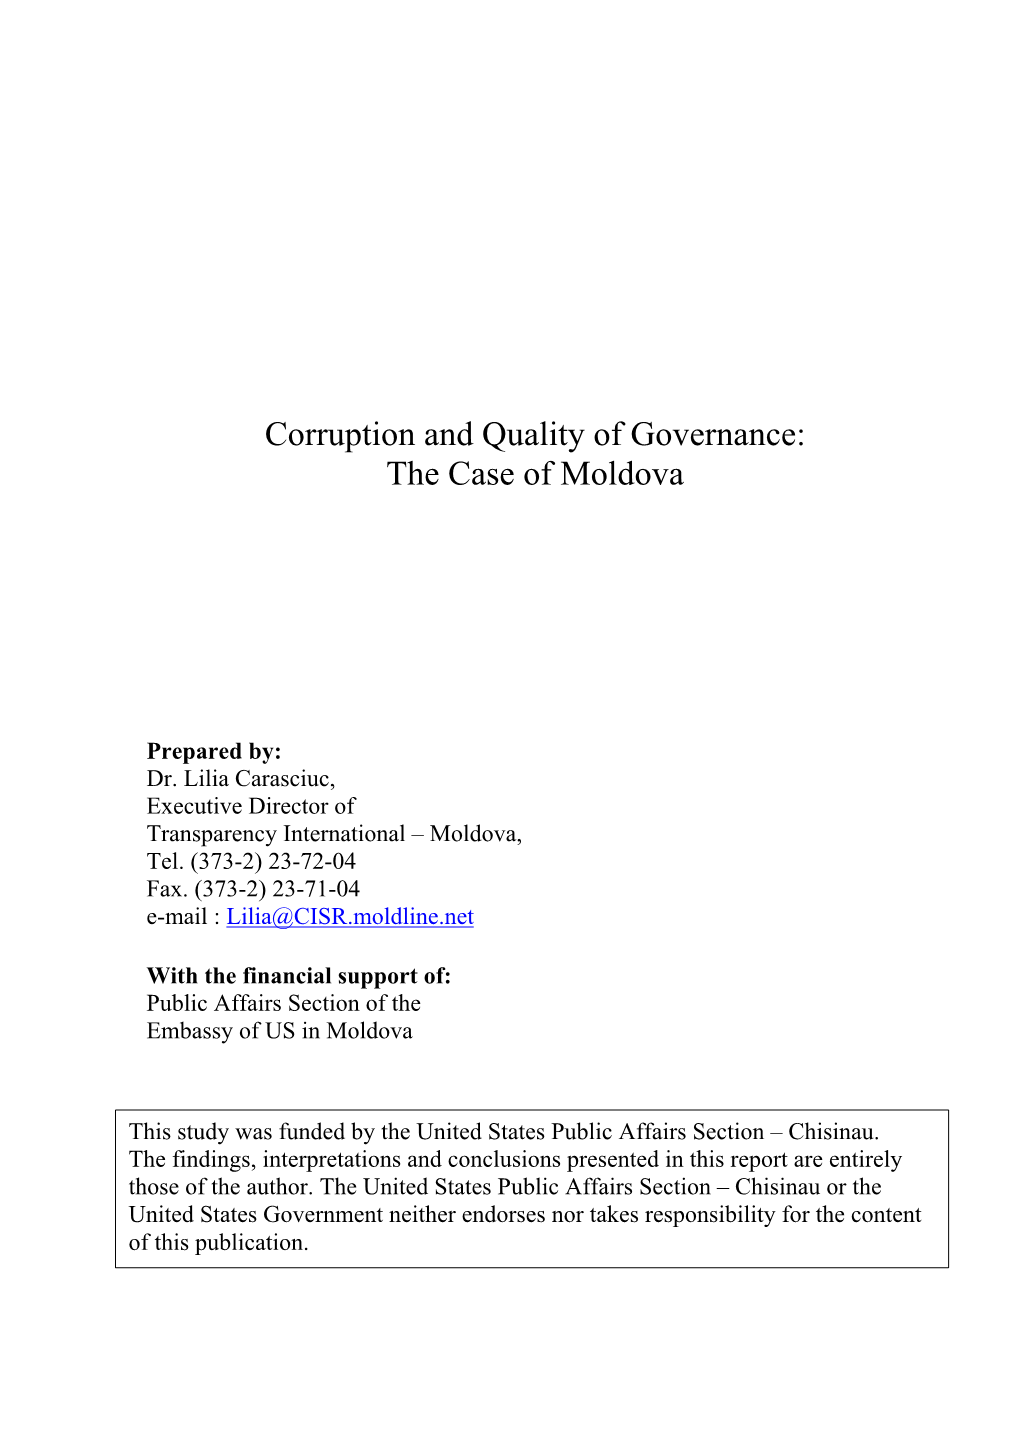 Corruption and Quality of Governance: the Case of Moldova